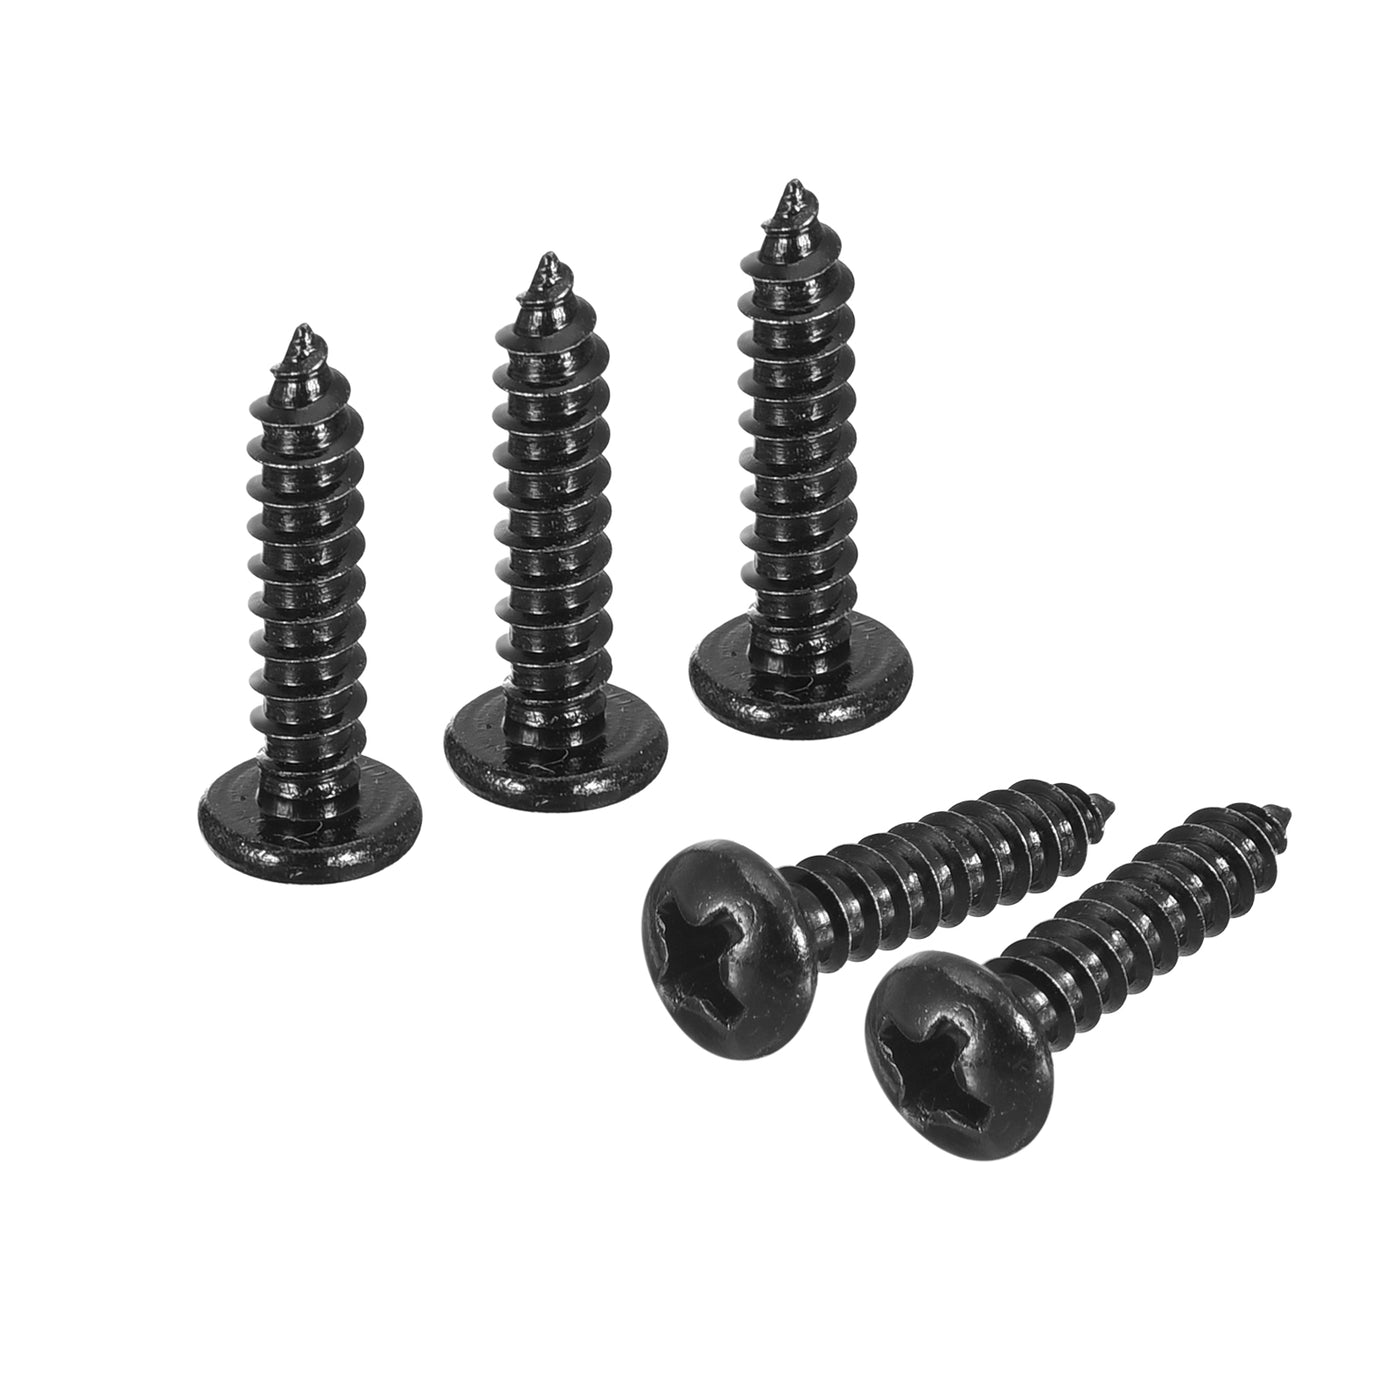 uxcell Uxcell #6 x 5/8" Phillips Pan Head Self-tapping Screw, 50pcs - 304 Stainless Steel Round Head Wood Screw Full Thread (Black)